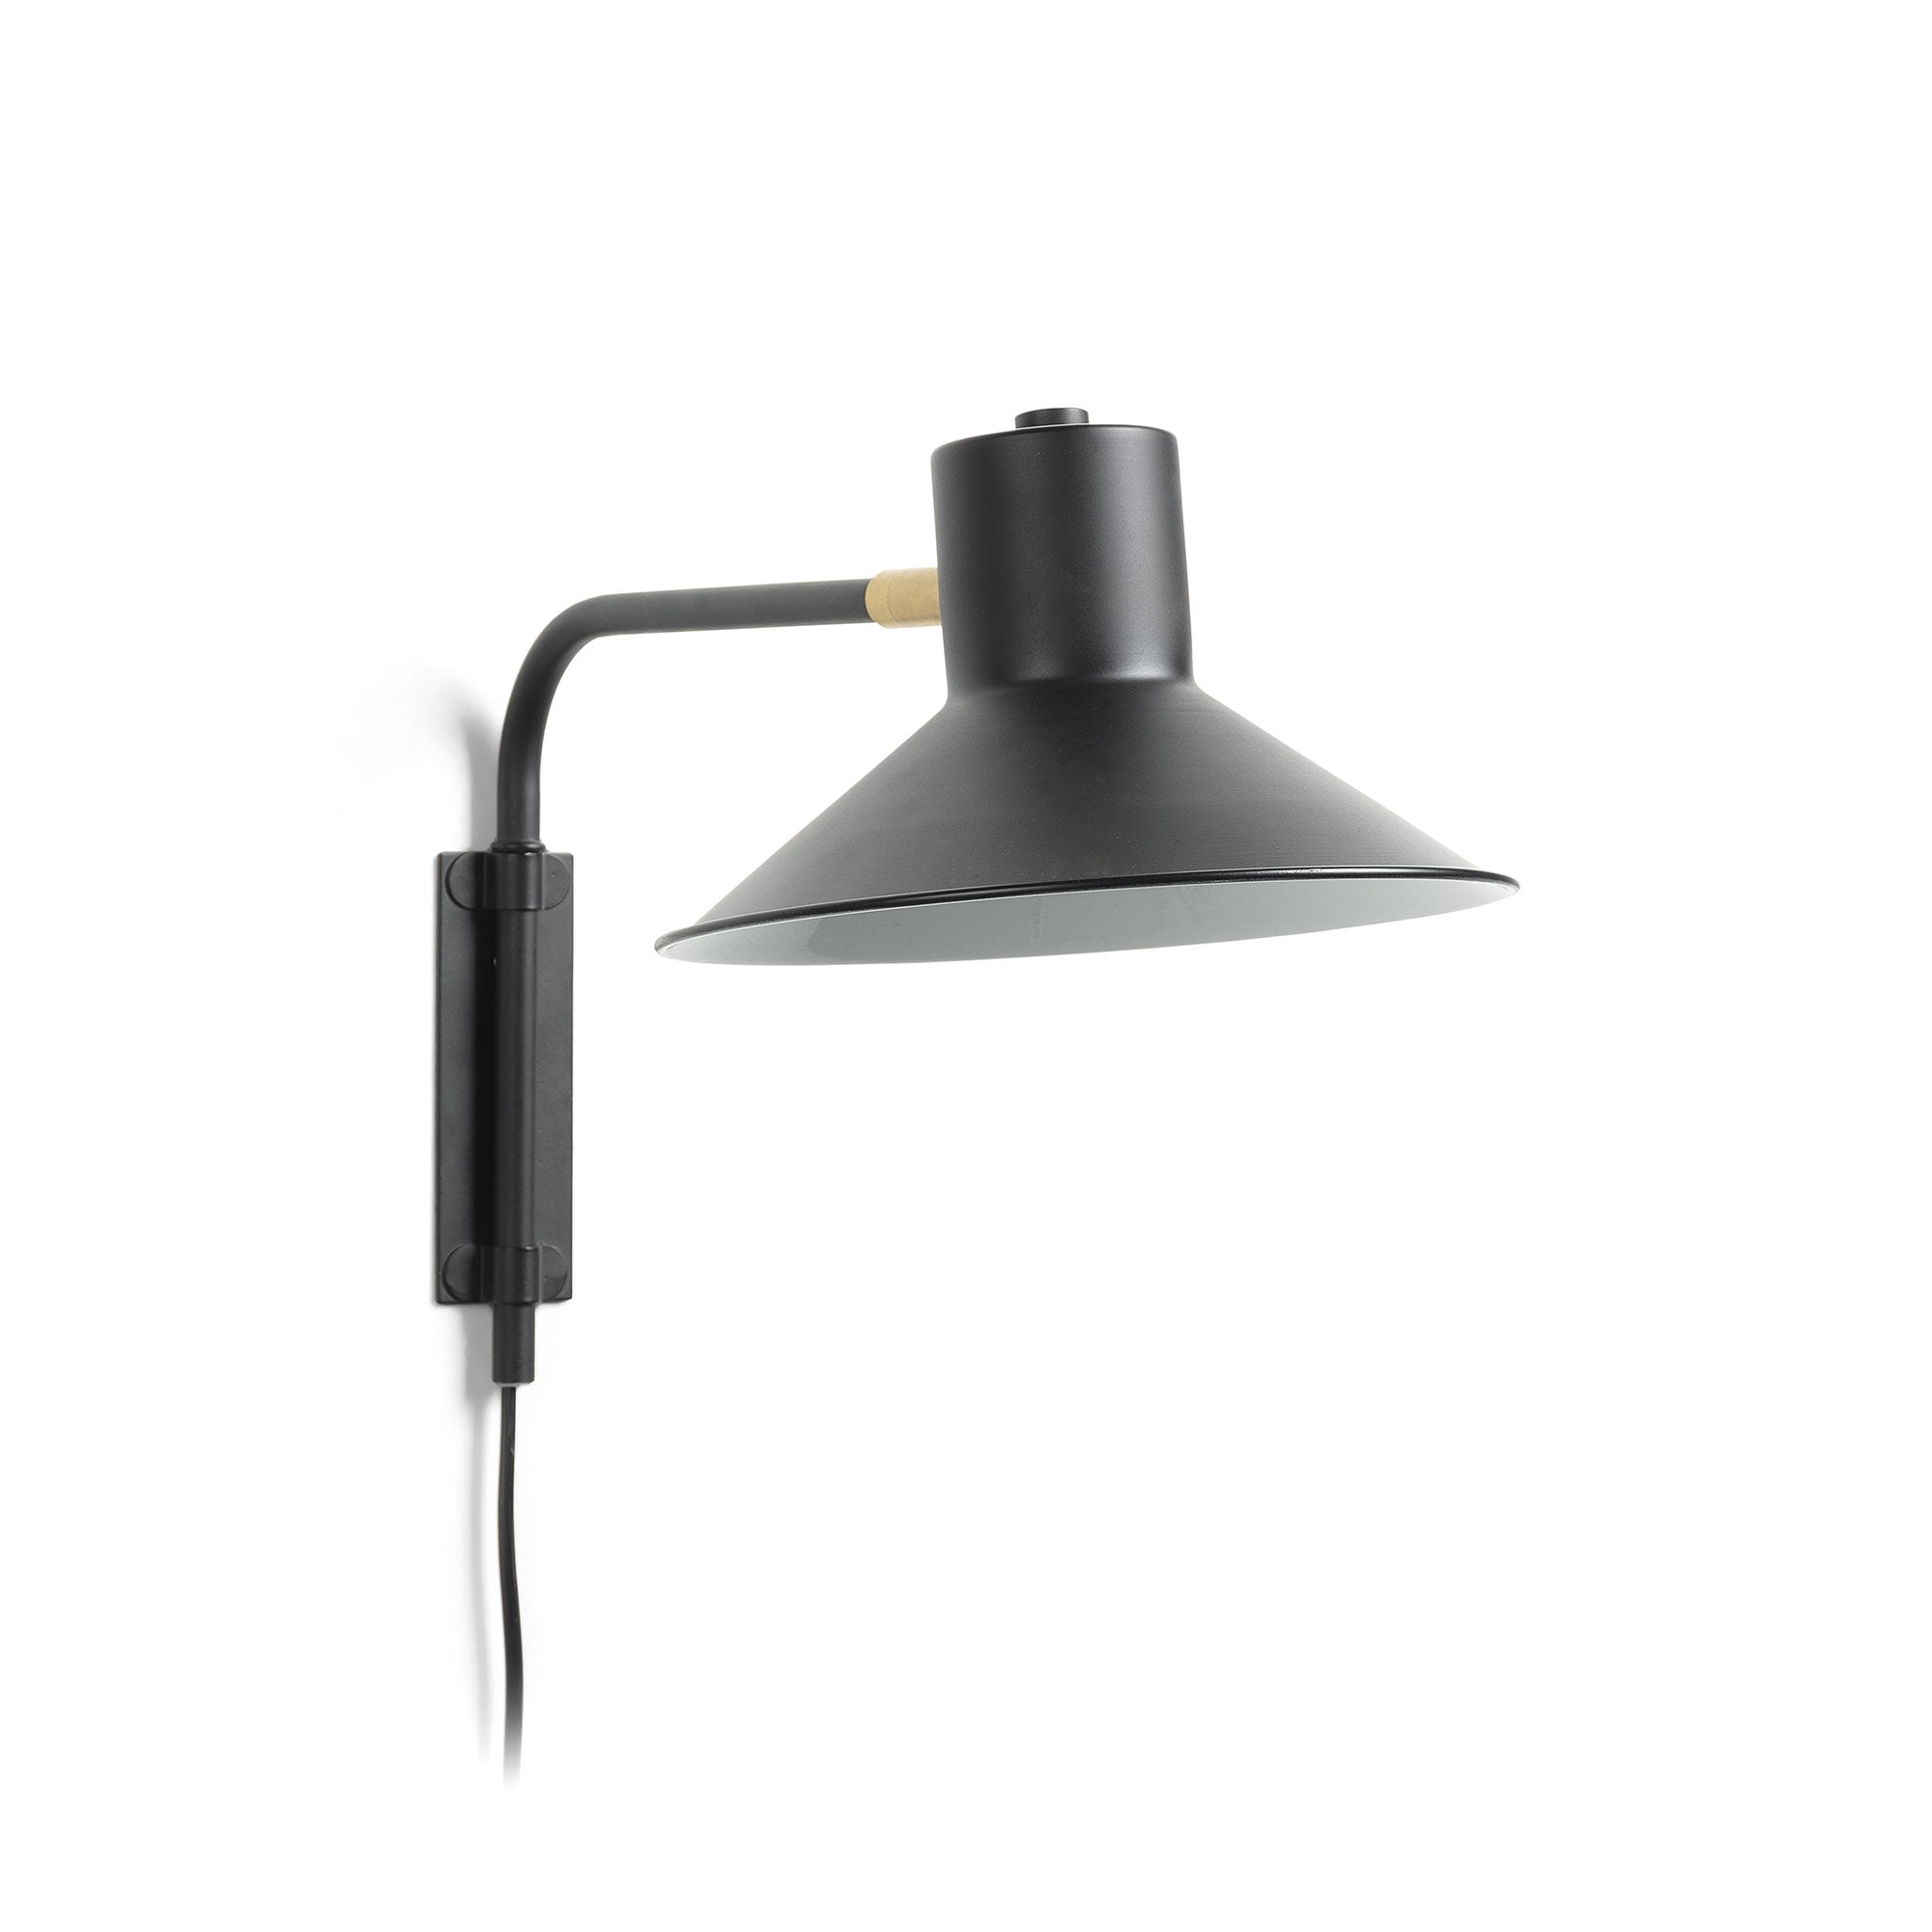 Small Aria wall light in steel with black finish